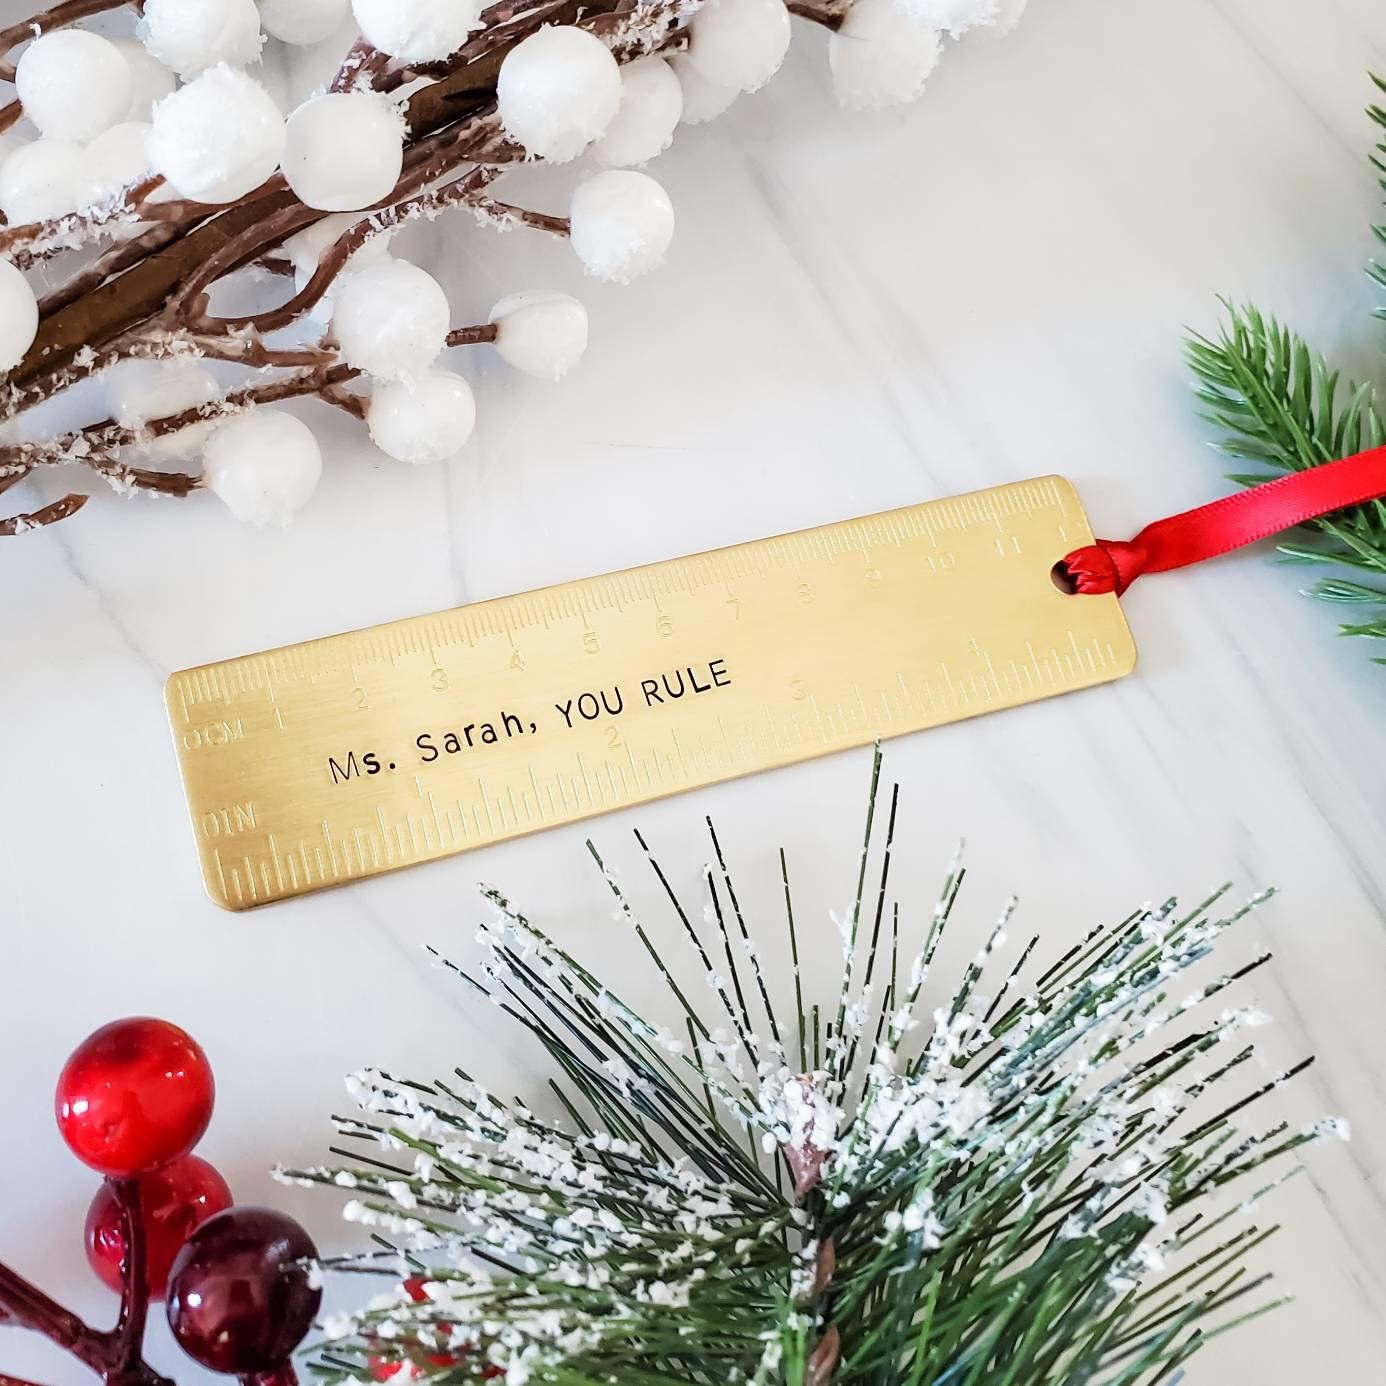 Personalized Ruler Christmas Ornament - Gift for Teacher Salt and Sparkle